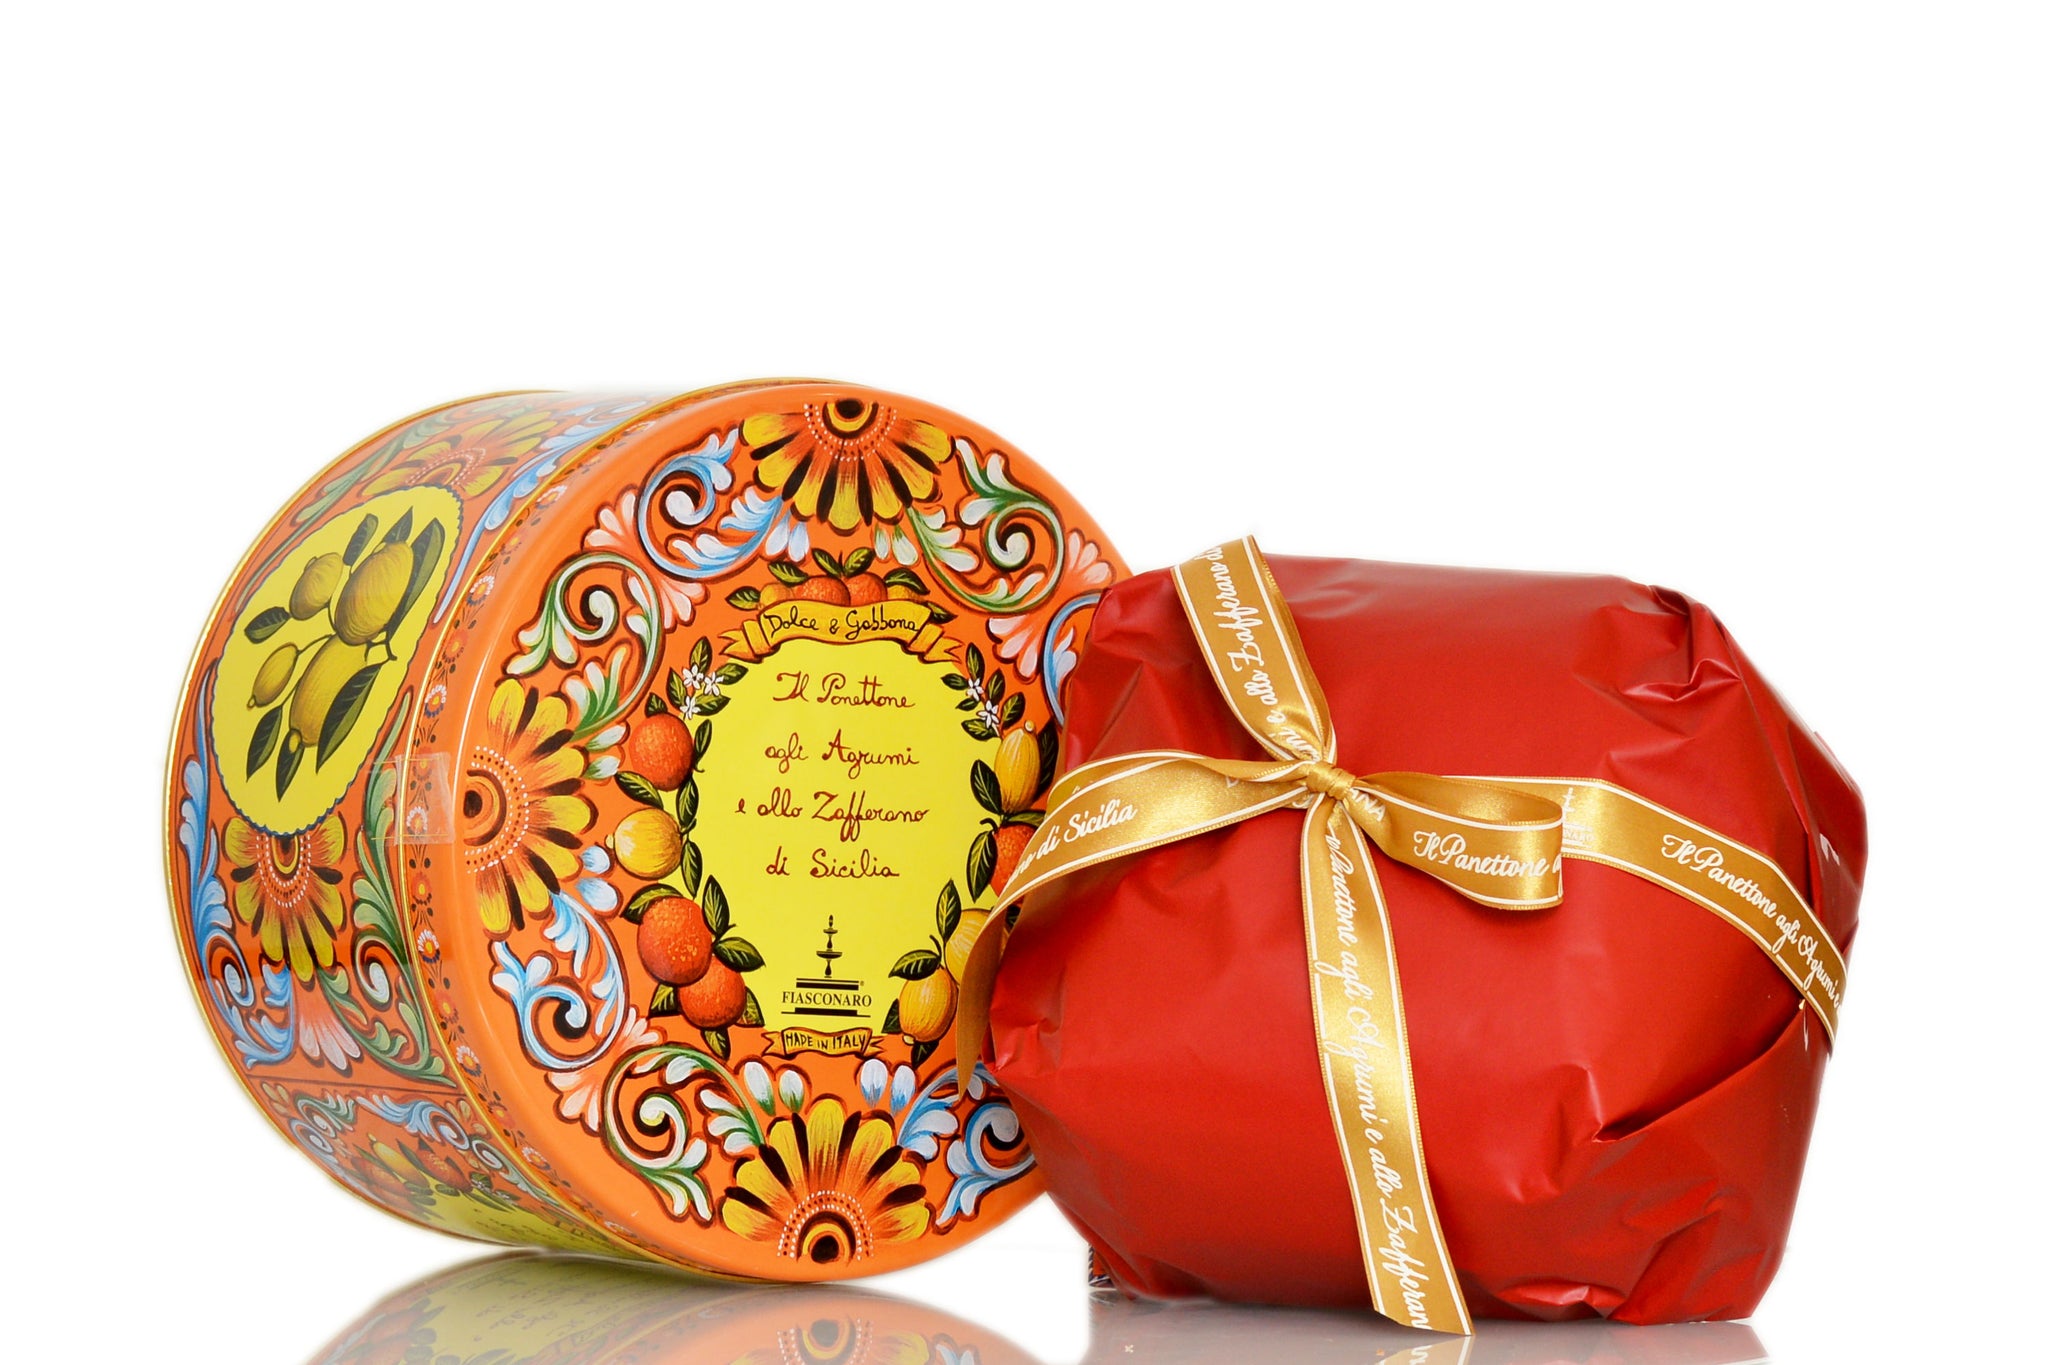 Dolce Gabbana Panettone By Fiasconaro 1kg Made In Sicily Shop The Red Beetle